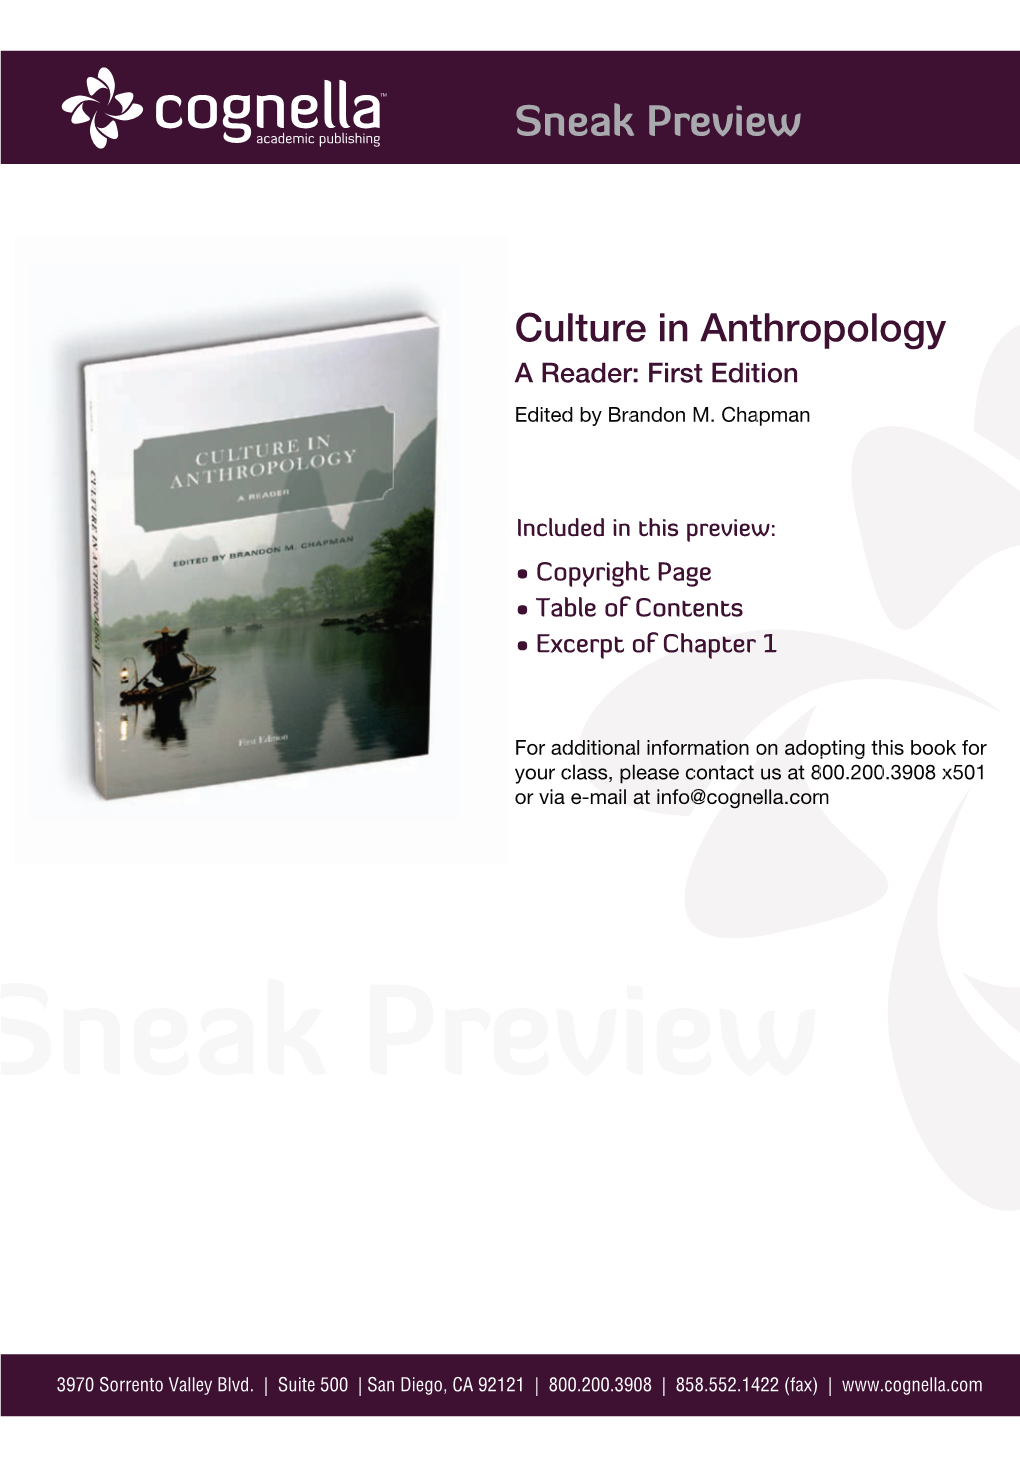 Culture in Anthropology a Reader: First Edition Edited by Brandon M